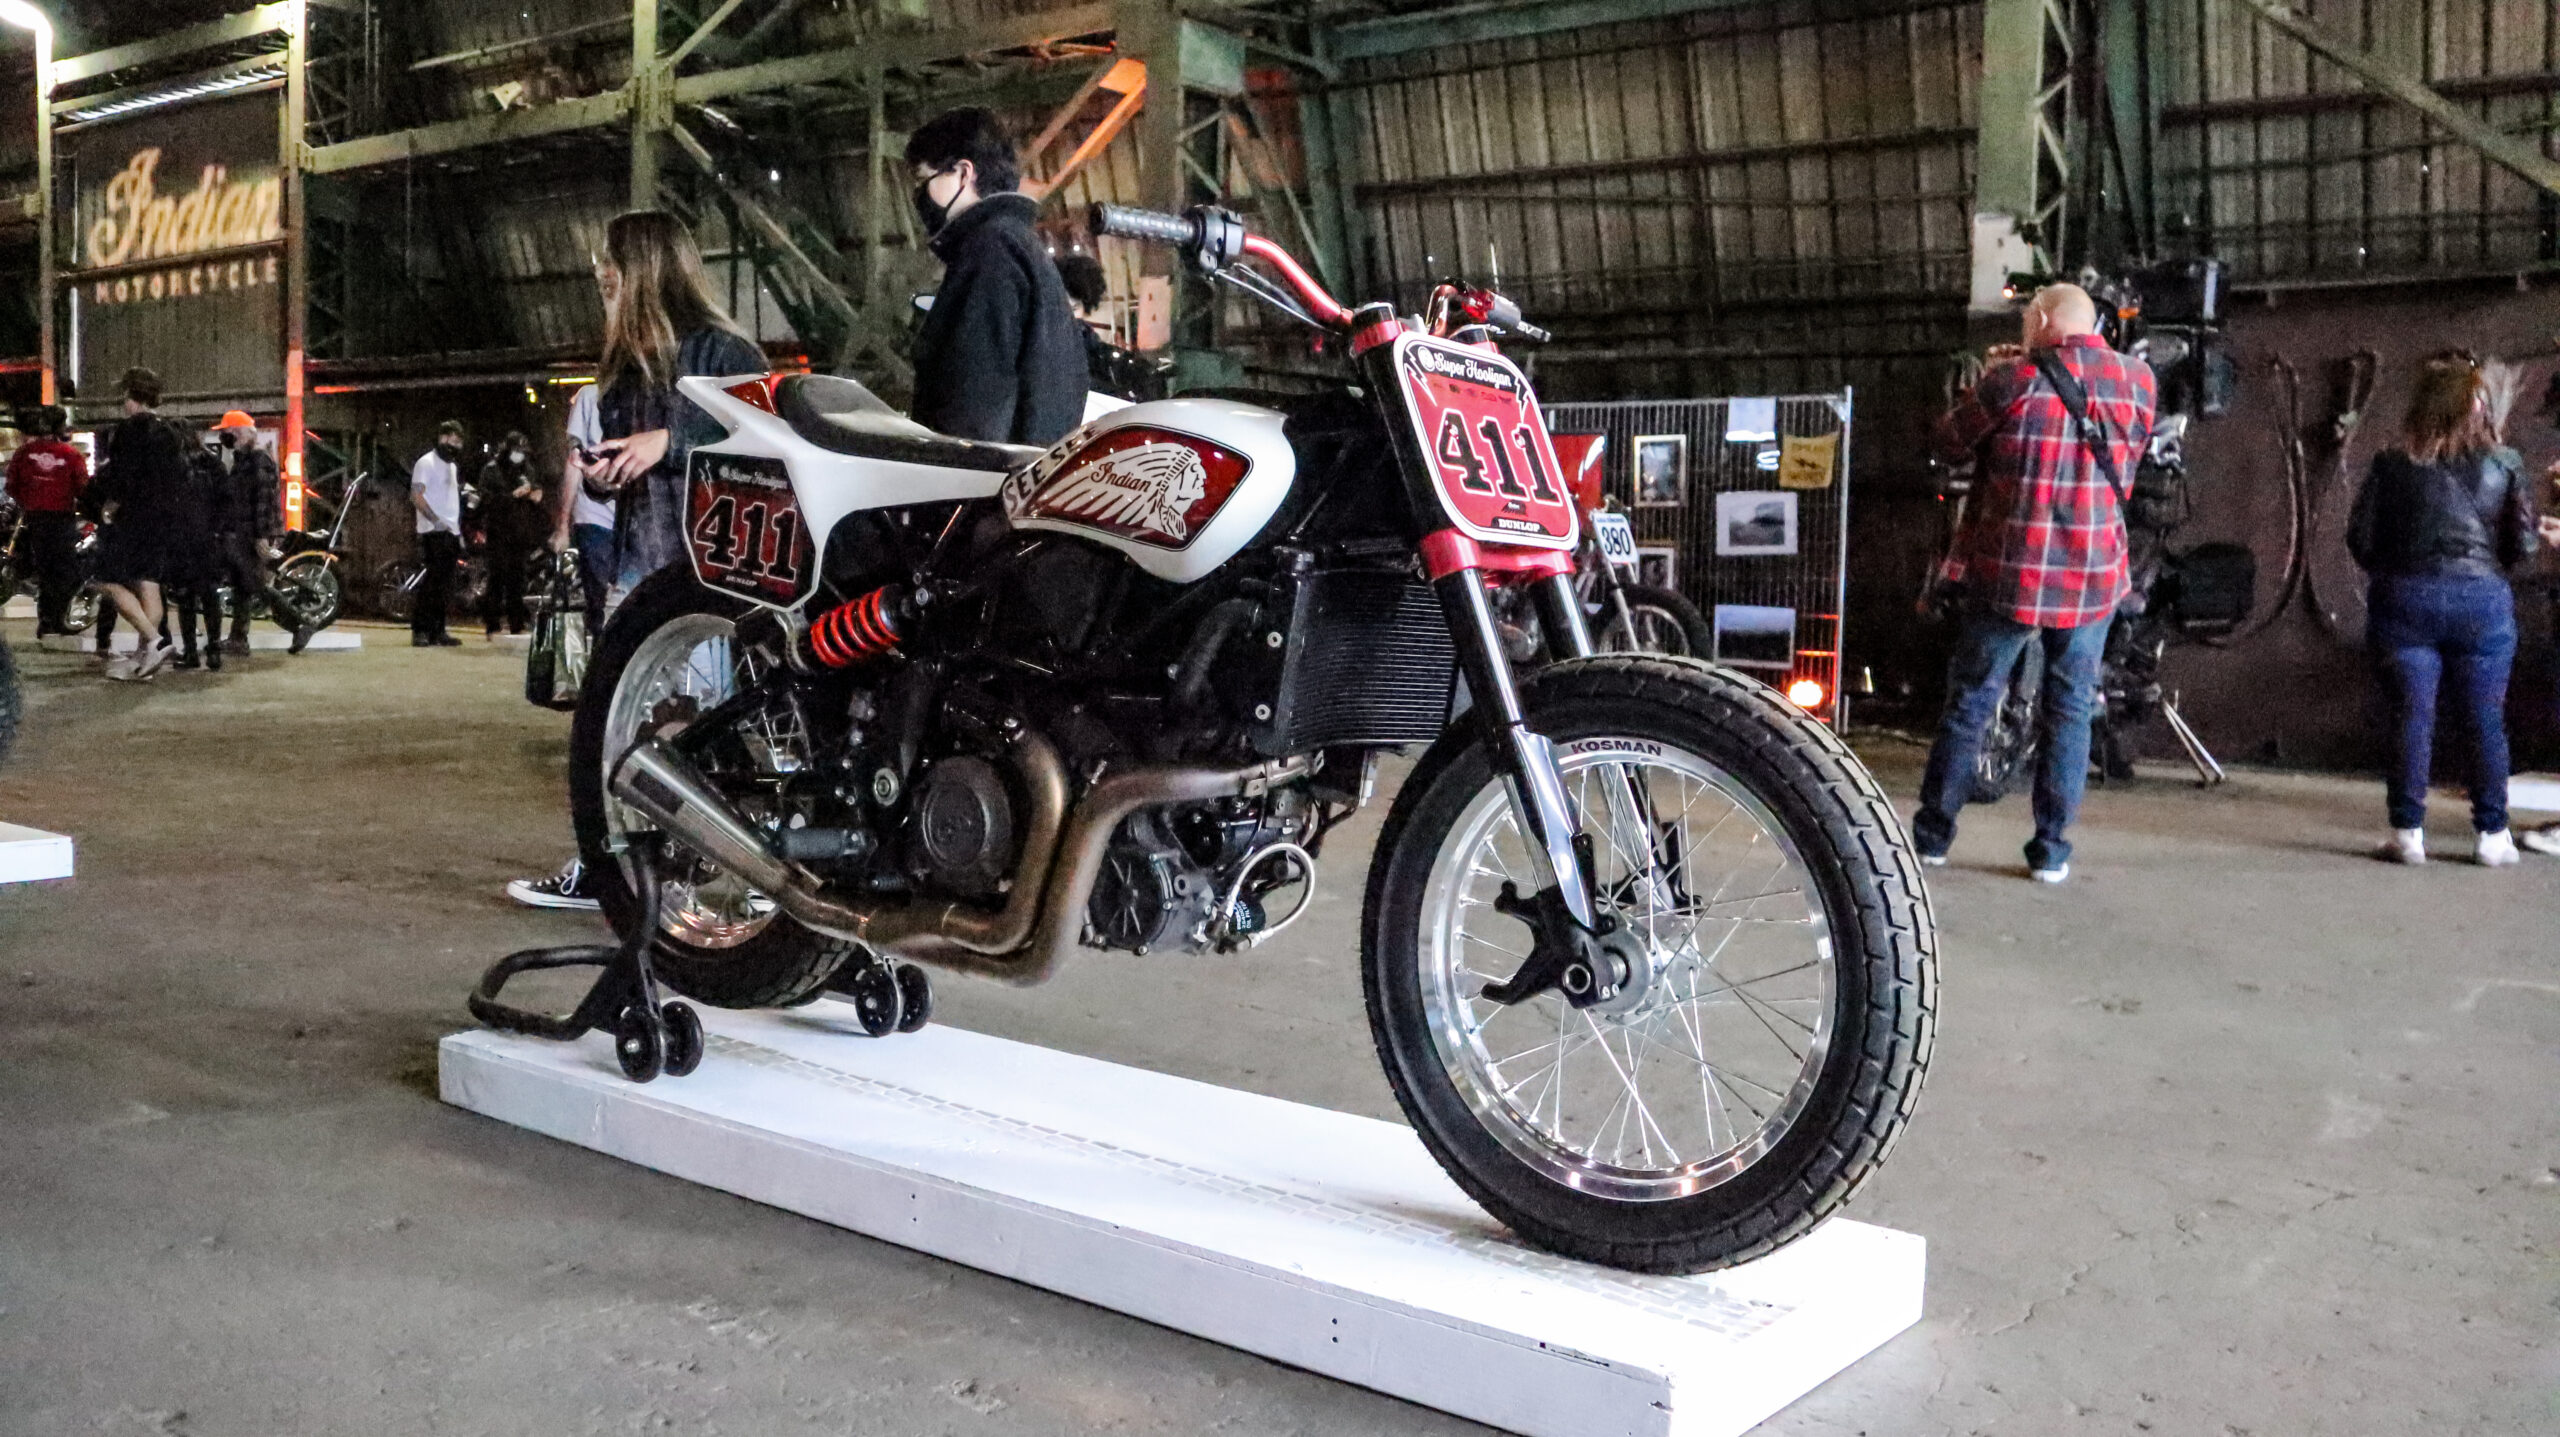 The One Moto Show 2021